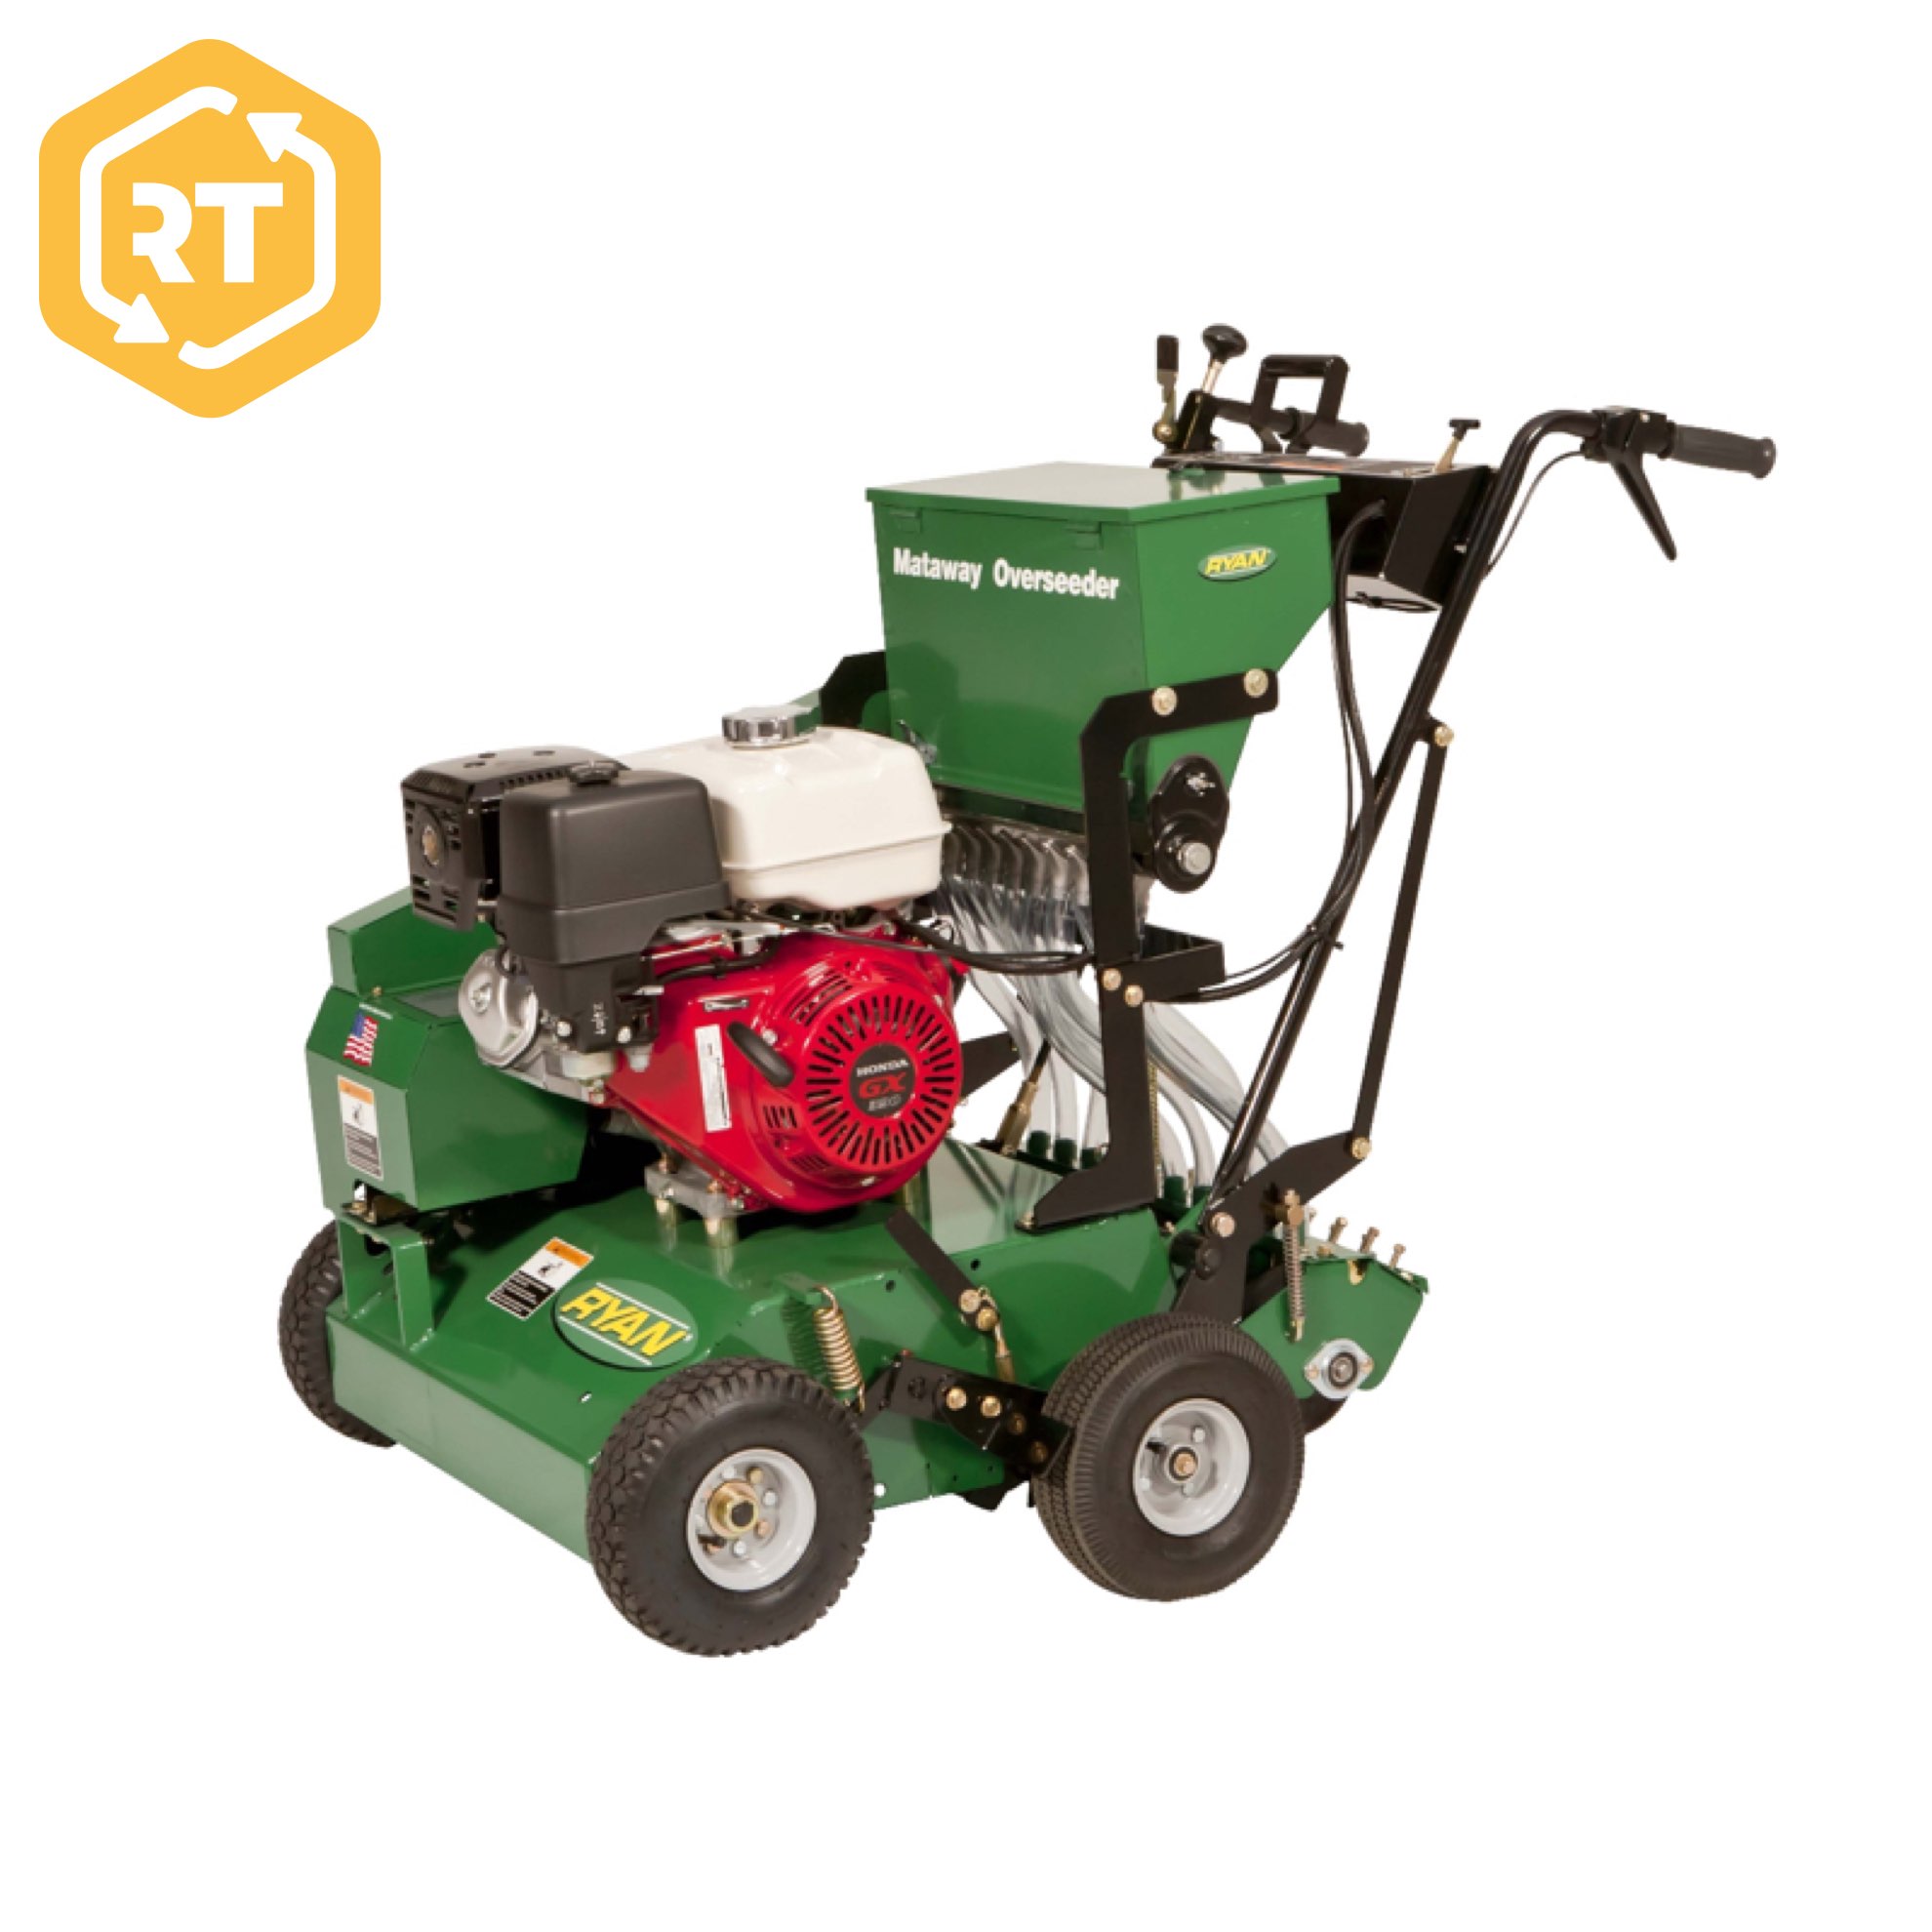 Ryan Mataway Pedestrian Overseeder | Available for Hire!